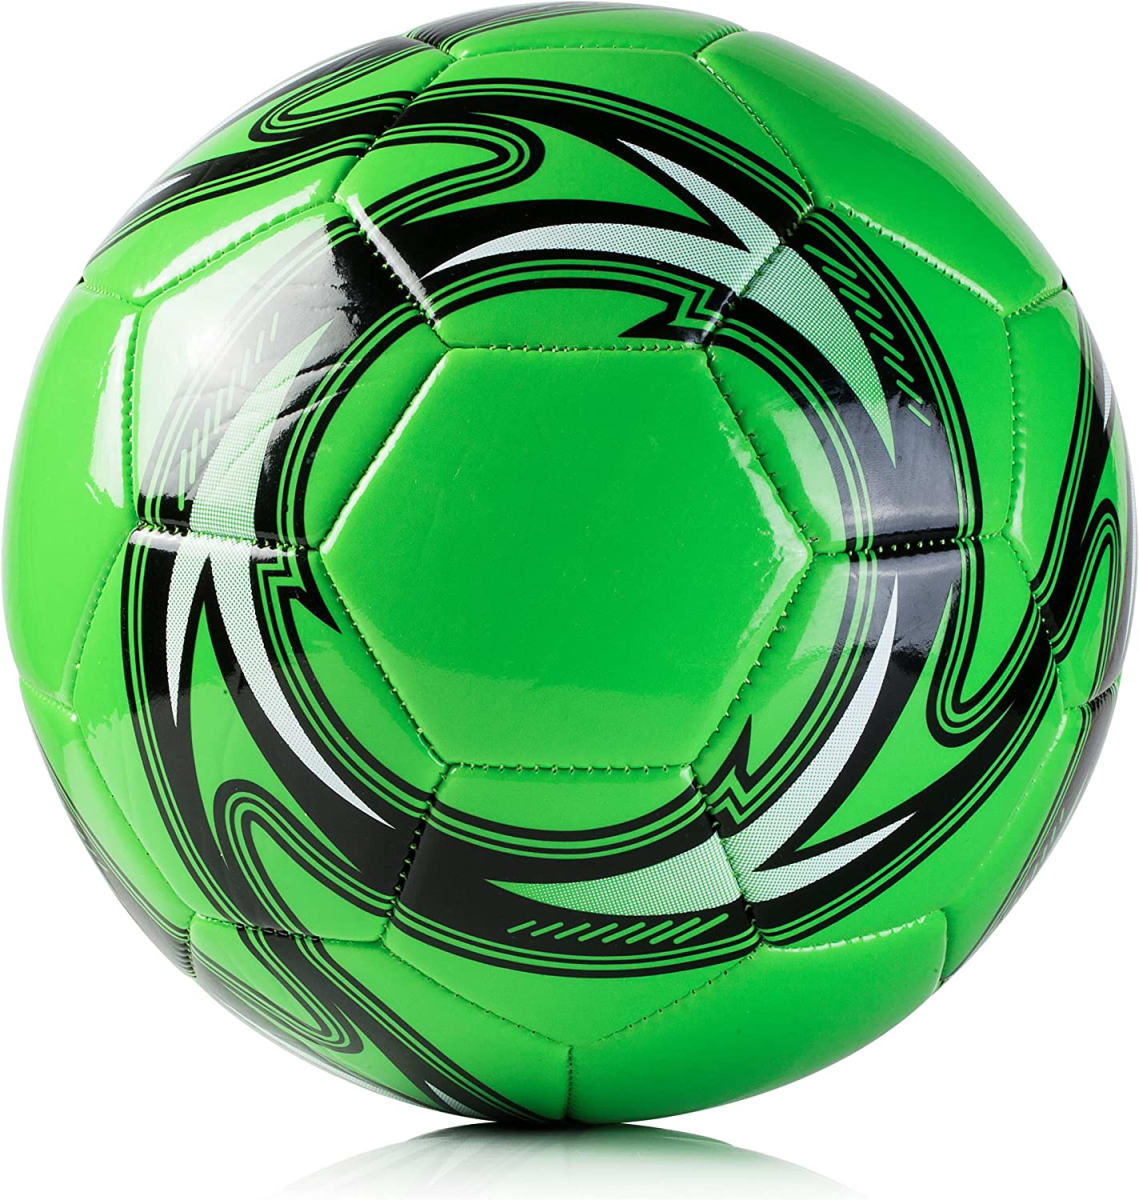 Soccer Ball Size 3 & Size 4 & Size 5 - Official Match Weight - 5 Colors - Youth & Adult Soccer Players